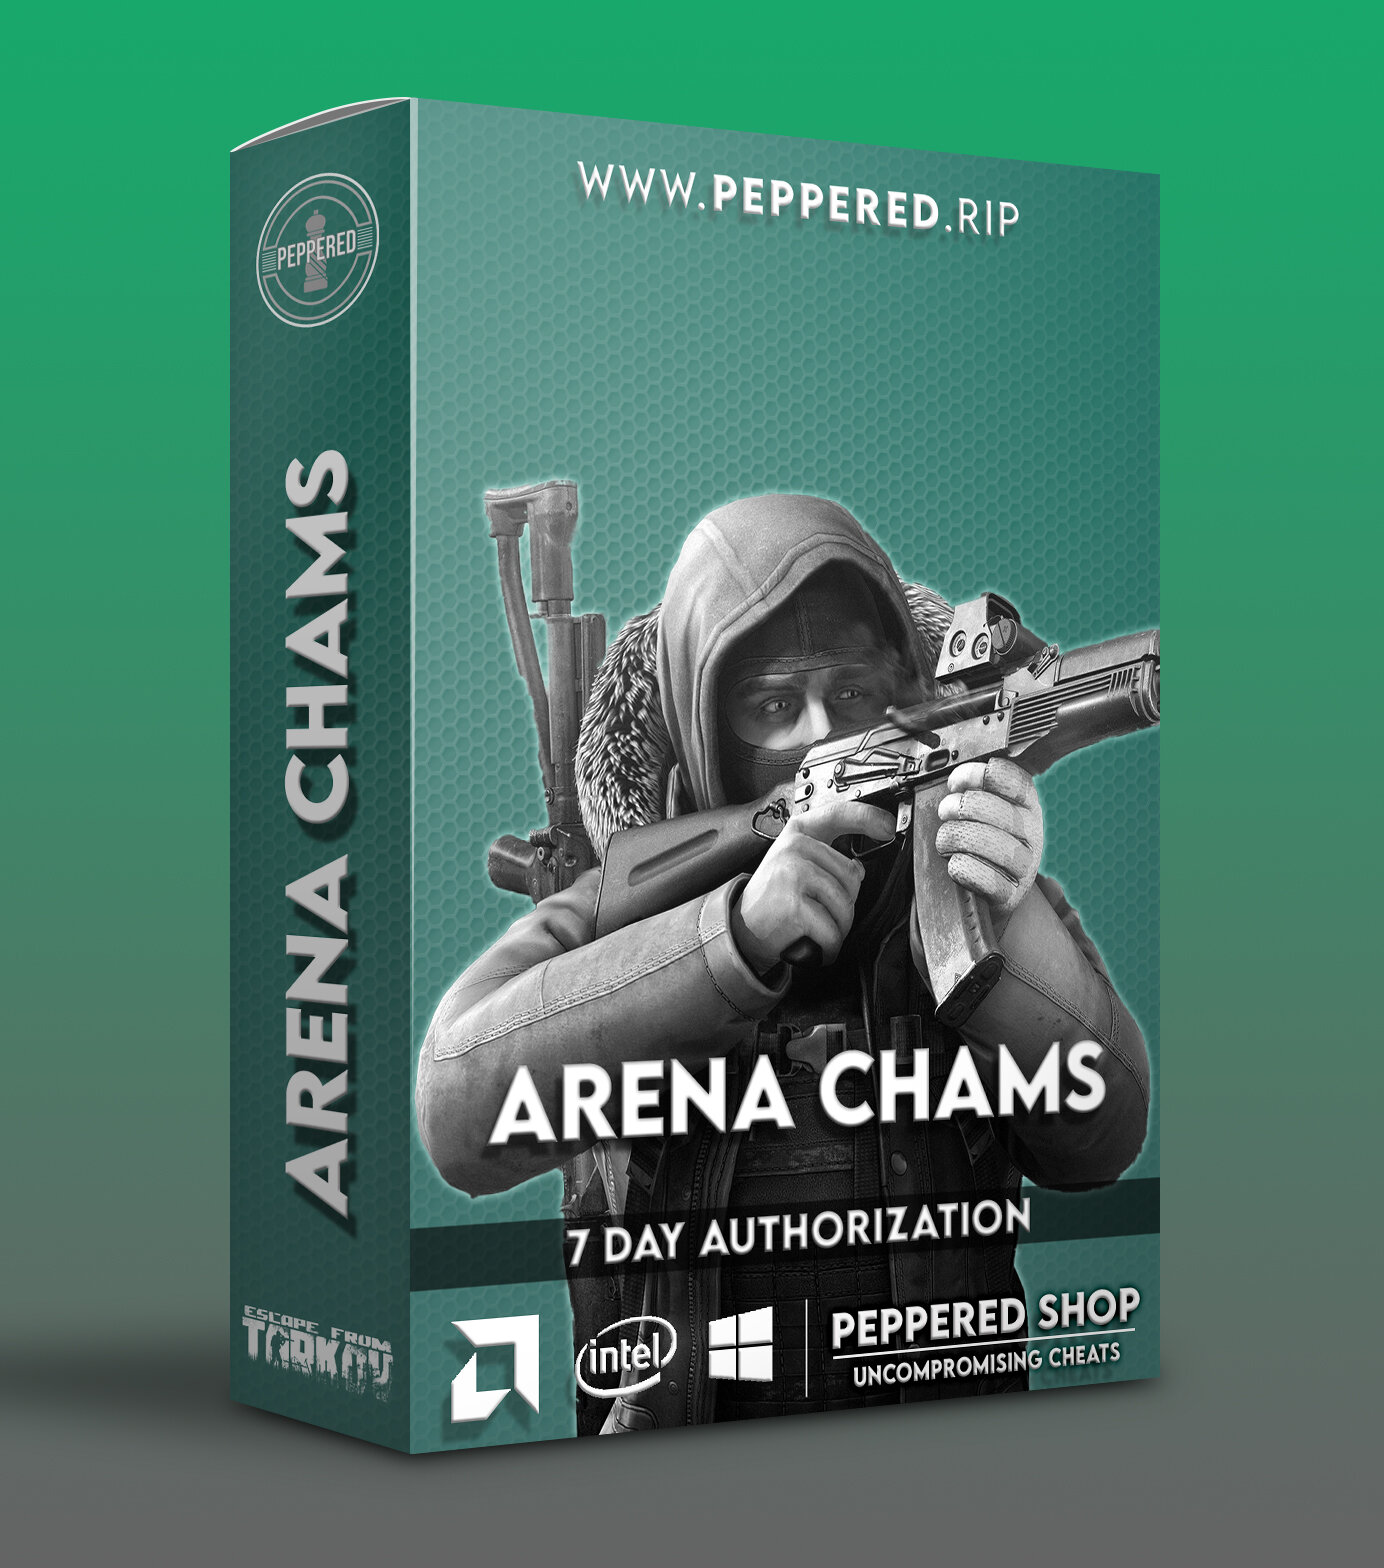 ARENA CHAMS 7 DAY